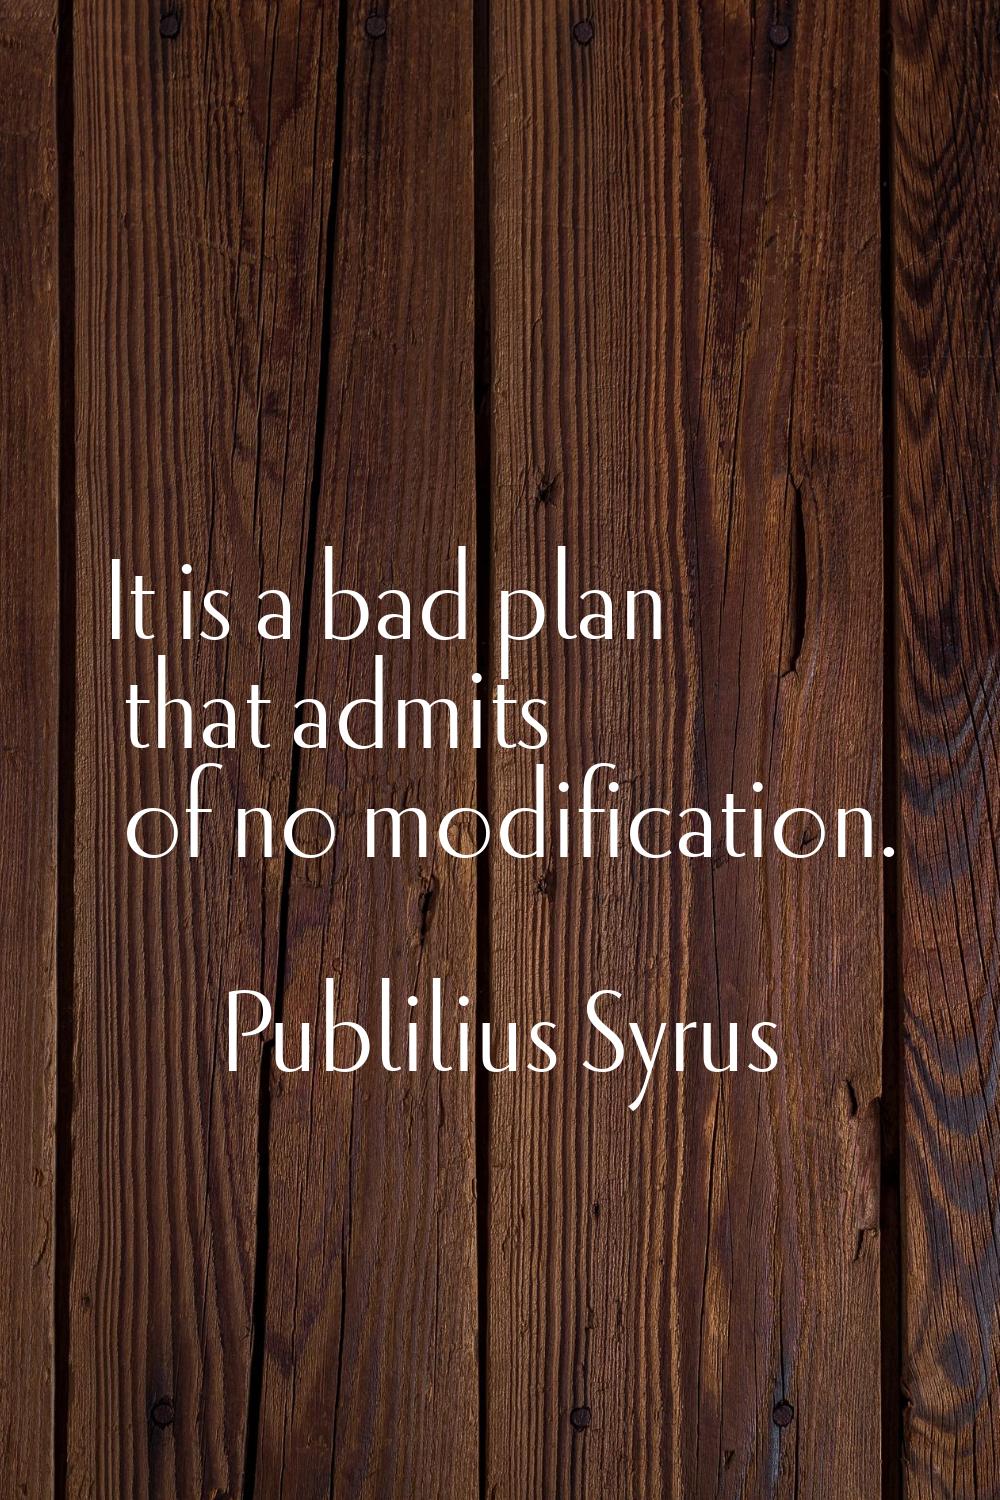 It is a bad plan that admits of no modification.